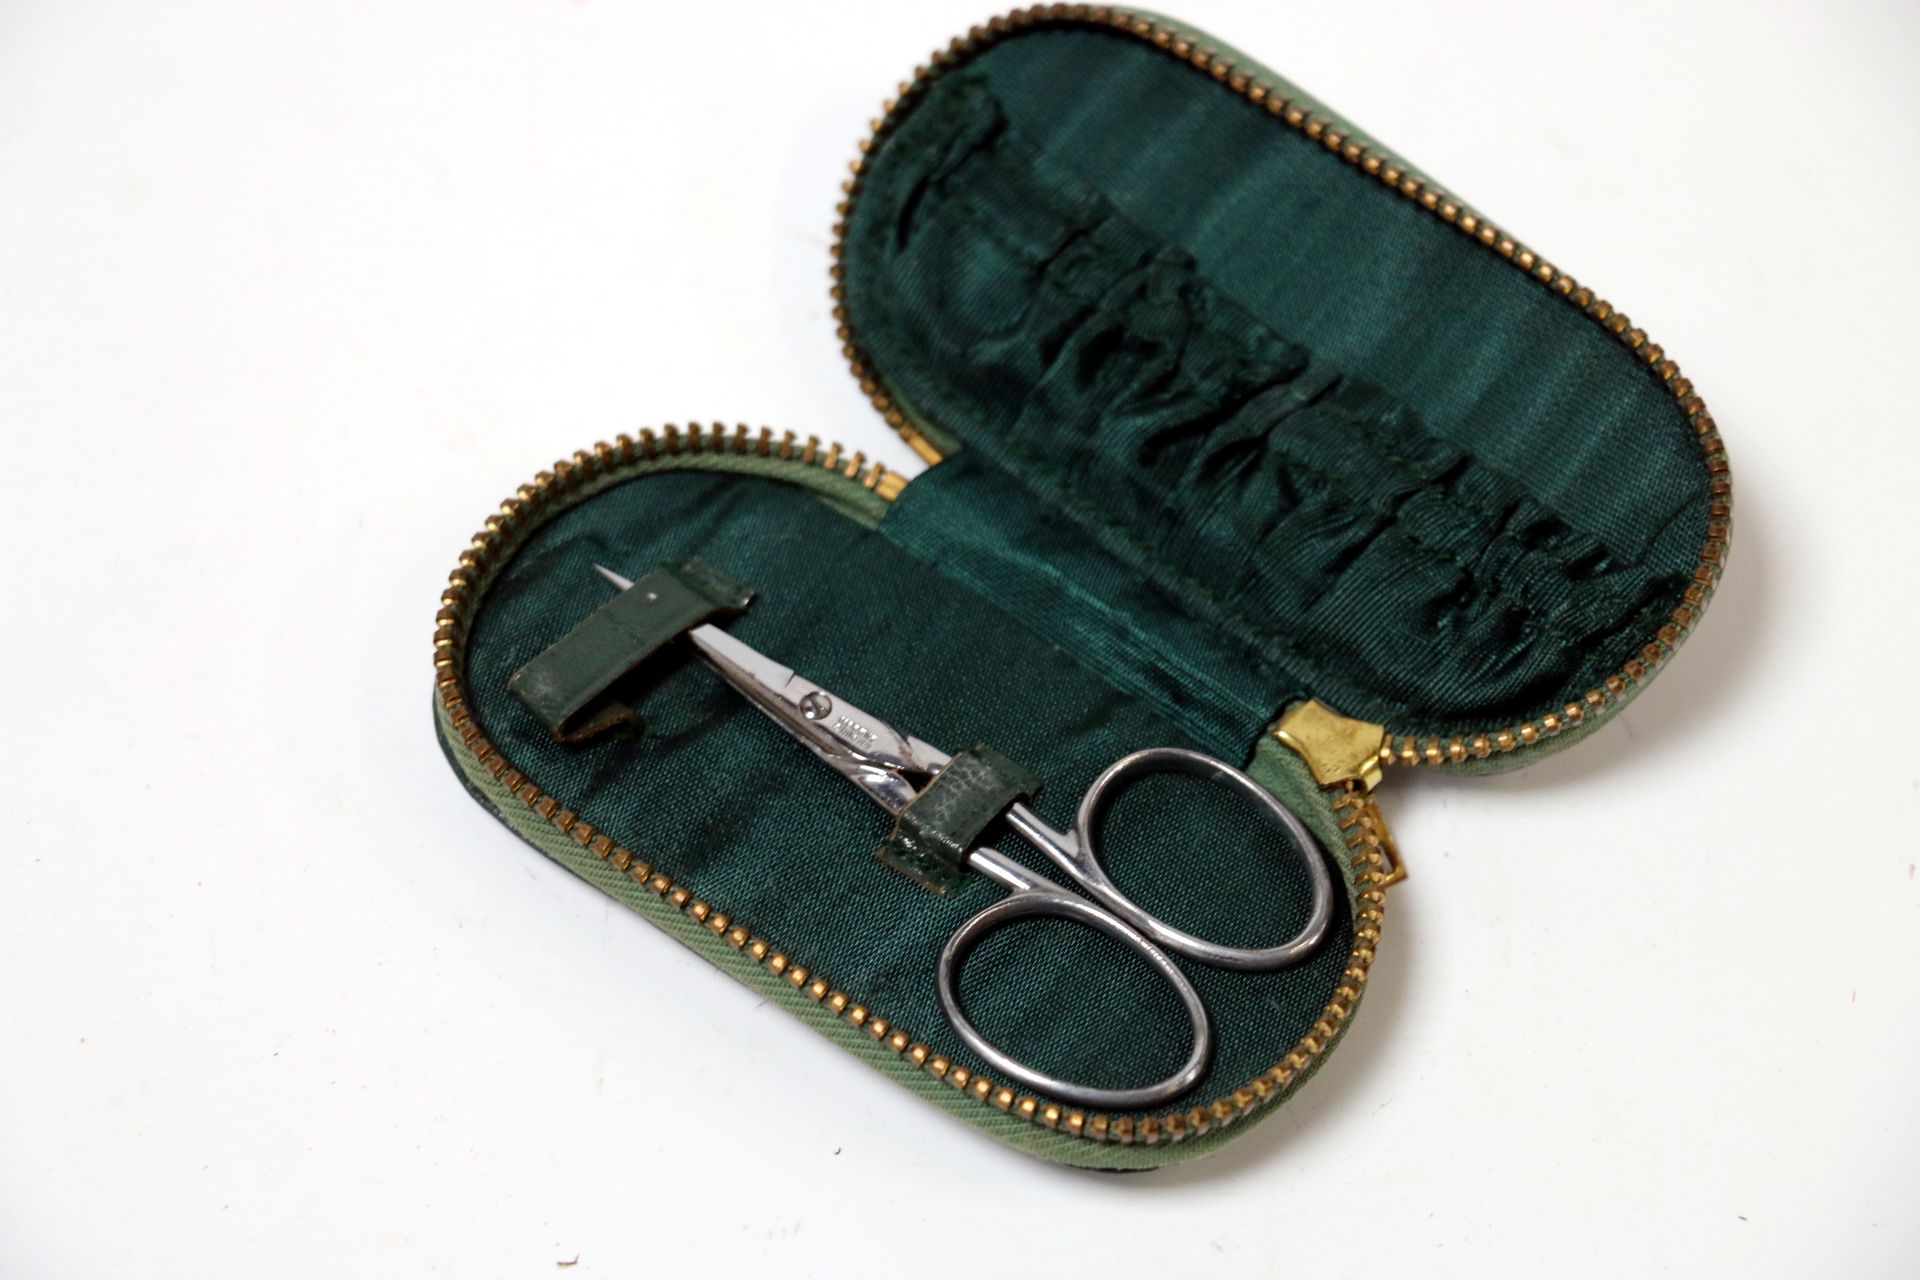 Null NOGENT. Pair of embroidery scissors (lgr 7,5 cm) in a small leather case wi&hellip;